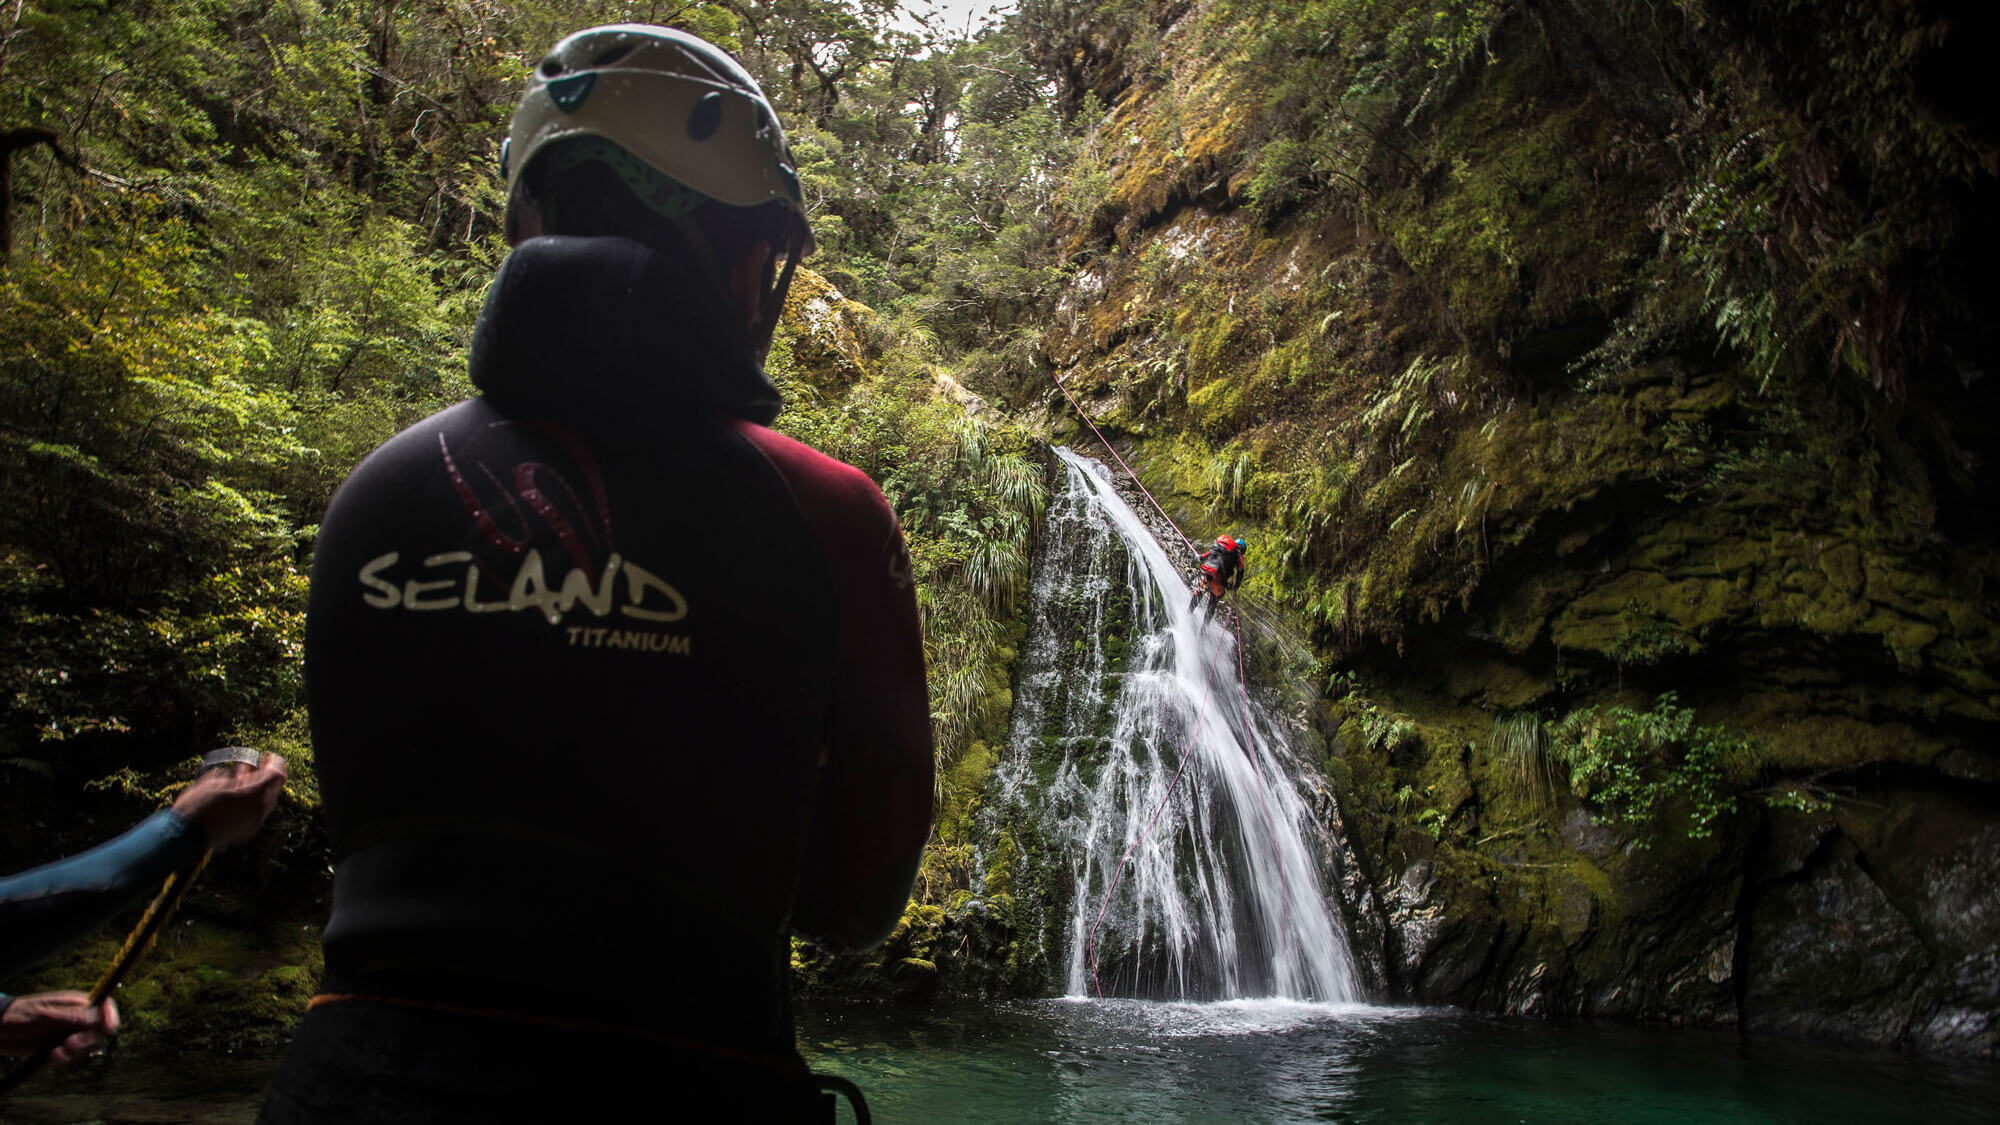 Canyoning or canyoneering in beautiful scenery in New Zealand